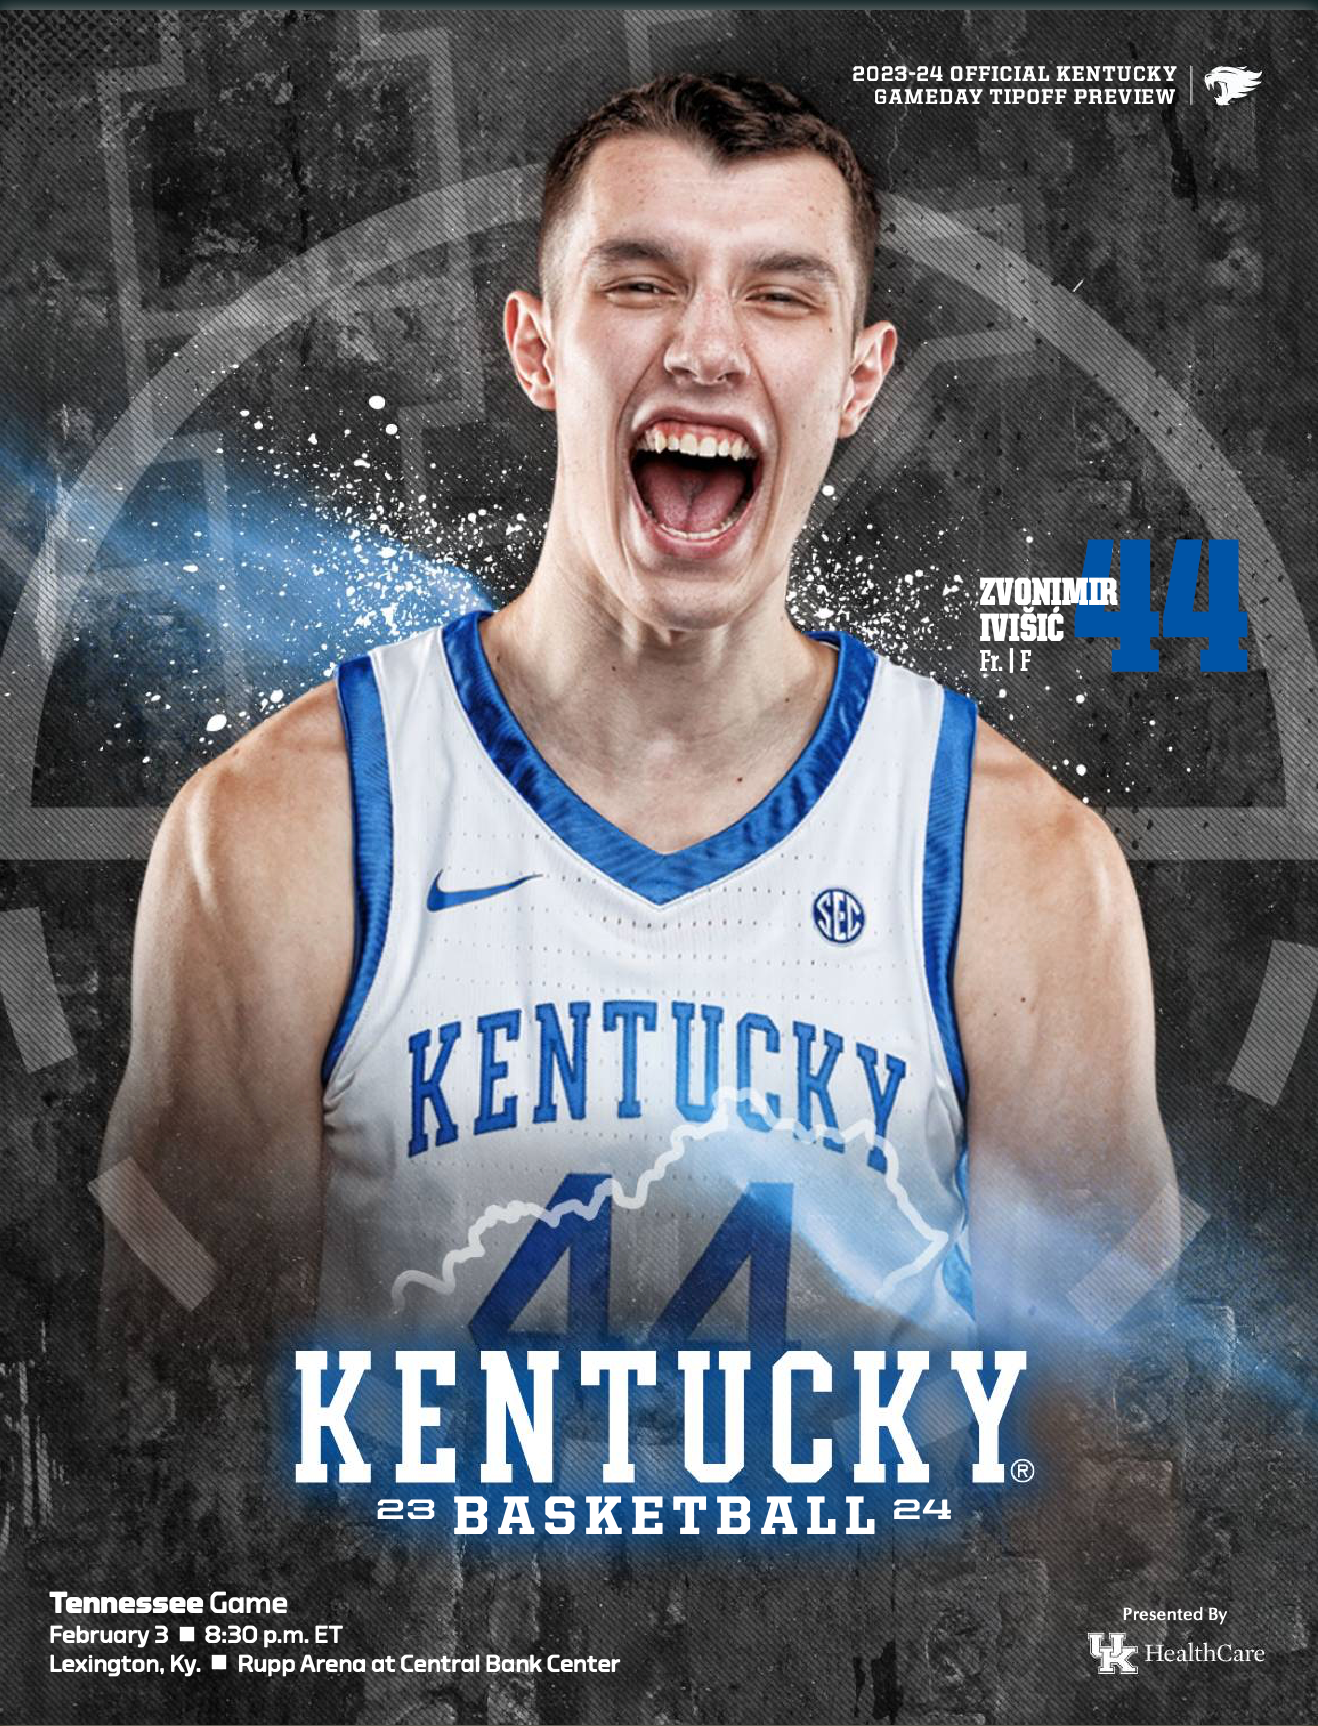 Listen and Watch UK Sports Network Radio Coverage of Kentucky Men's Basketball vs Tennessee